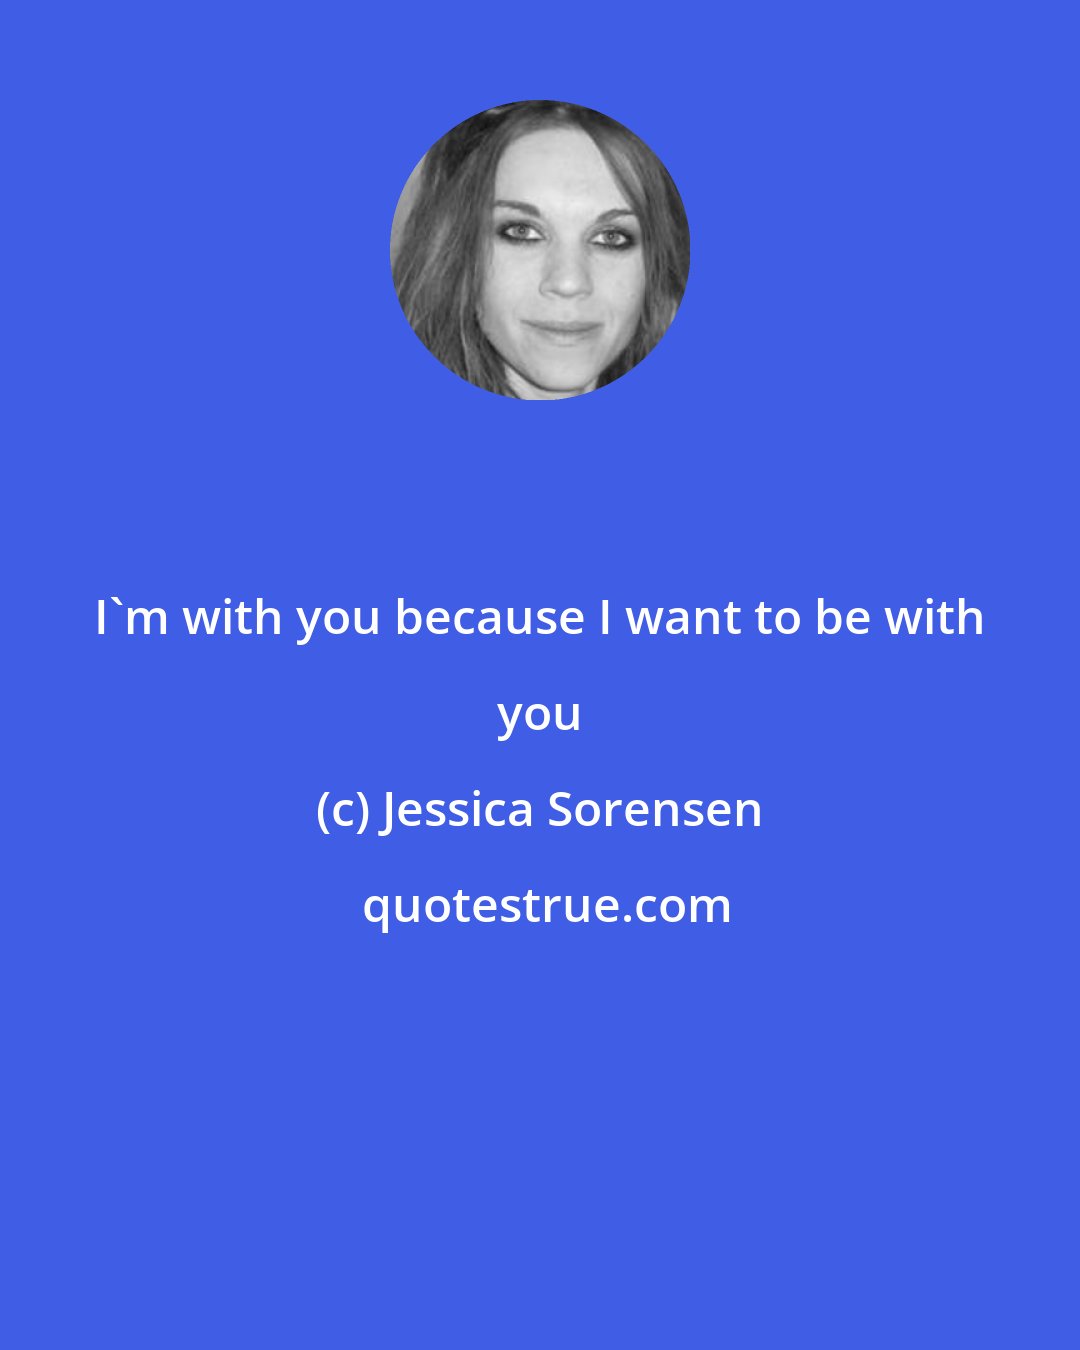 Jessica Sorensen: I'm with you because I want to be with you